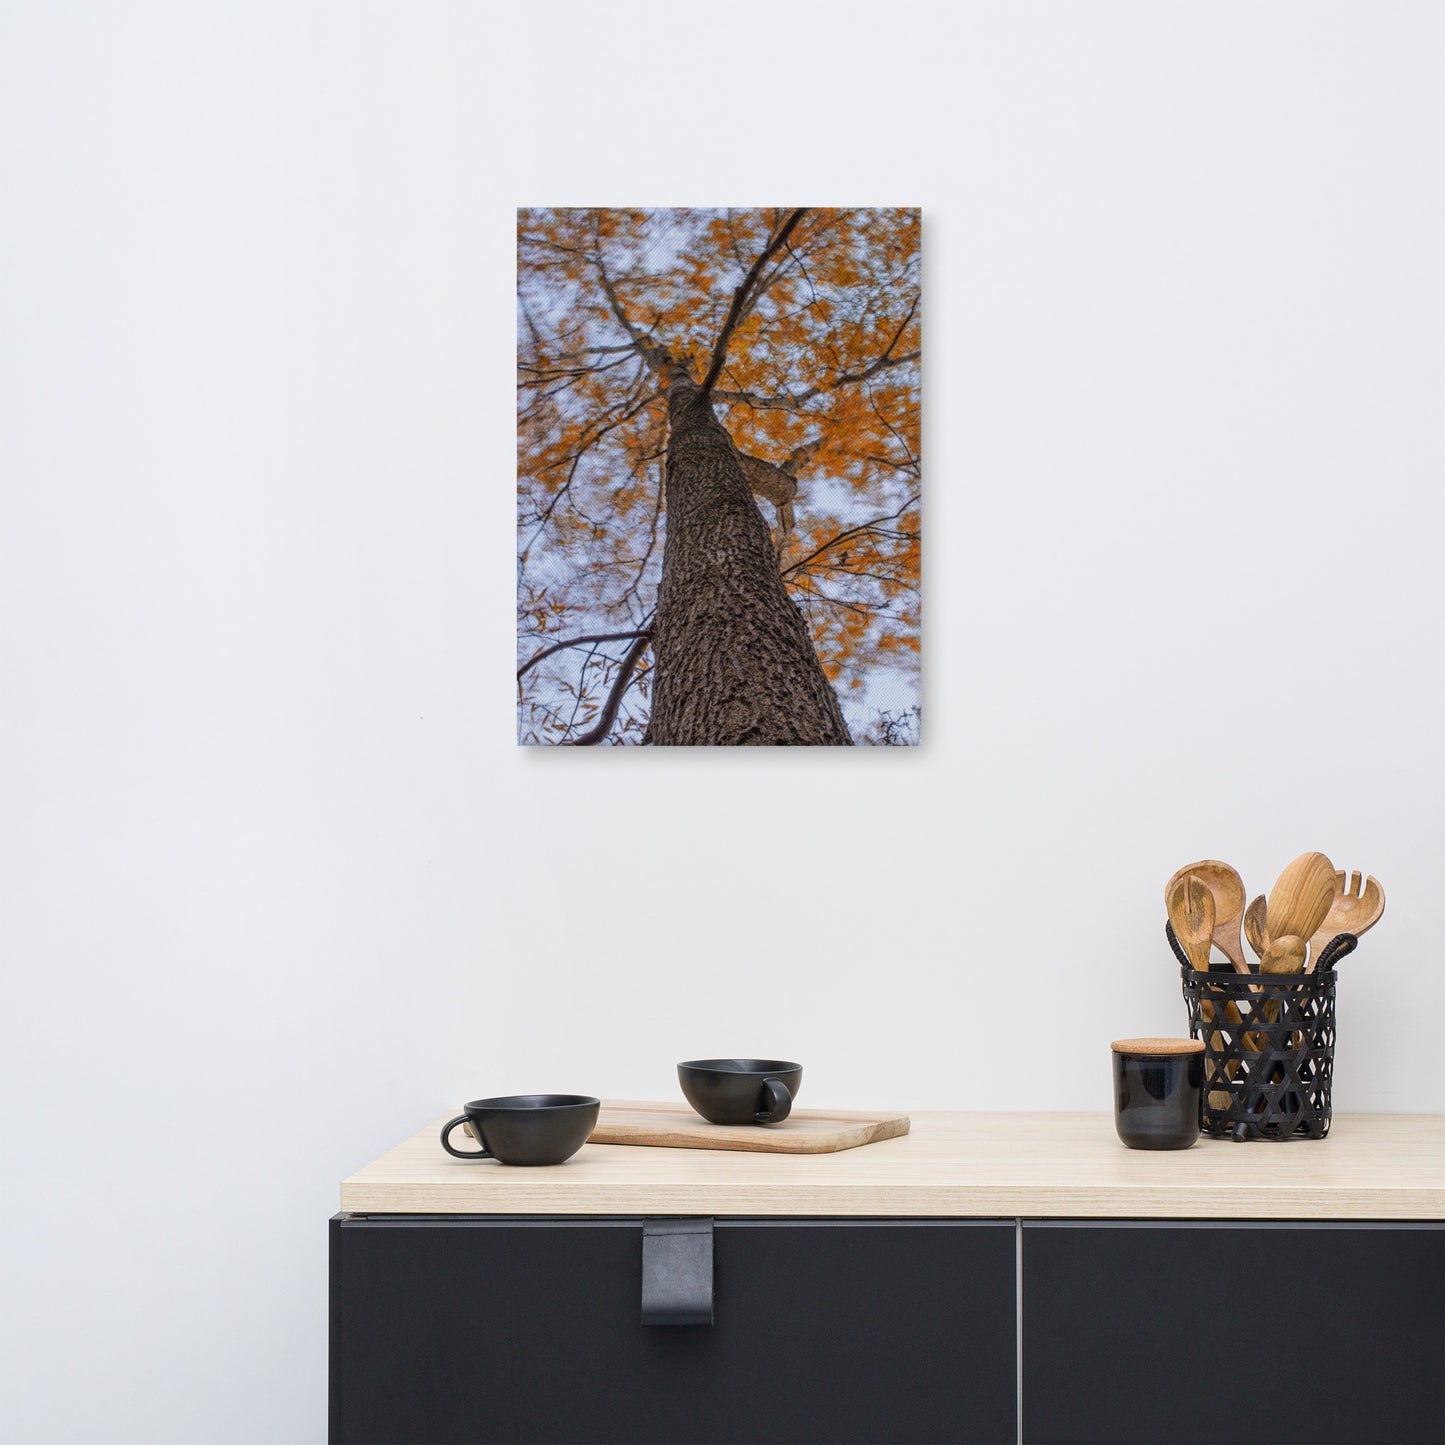 Wind in the Trees Botanical Nature Canvas Wall Art Prints